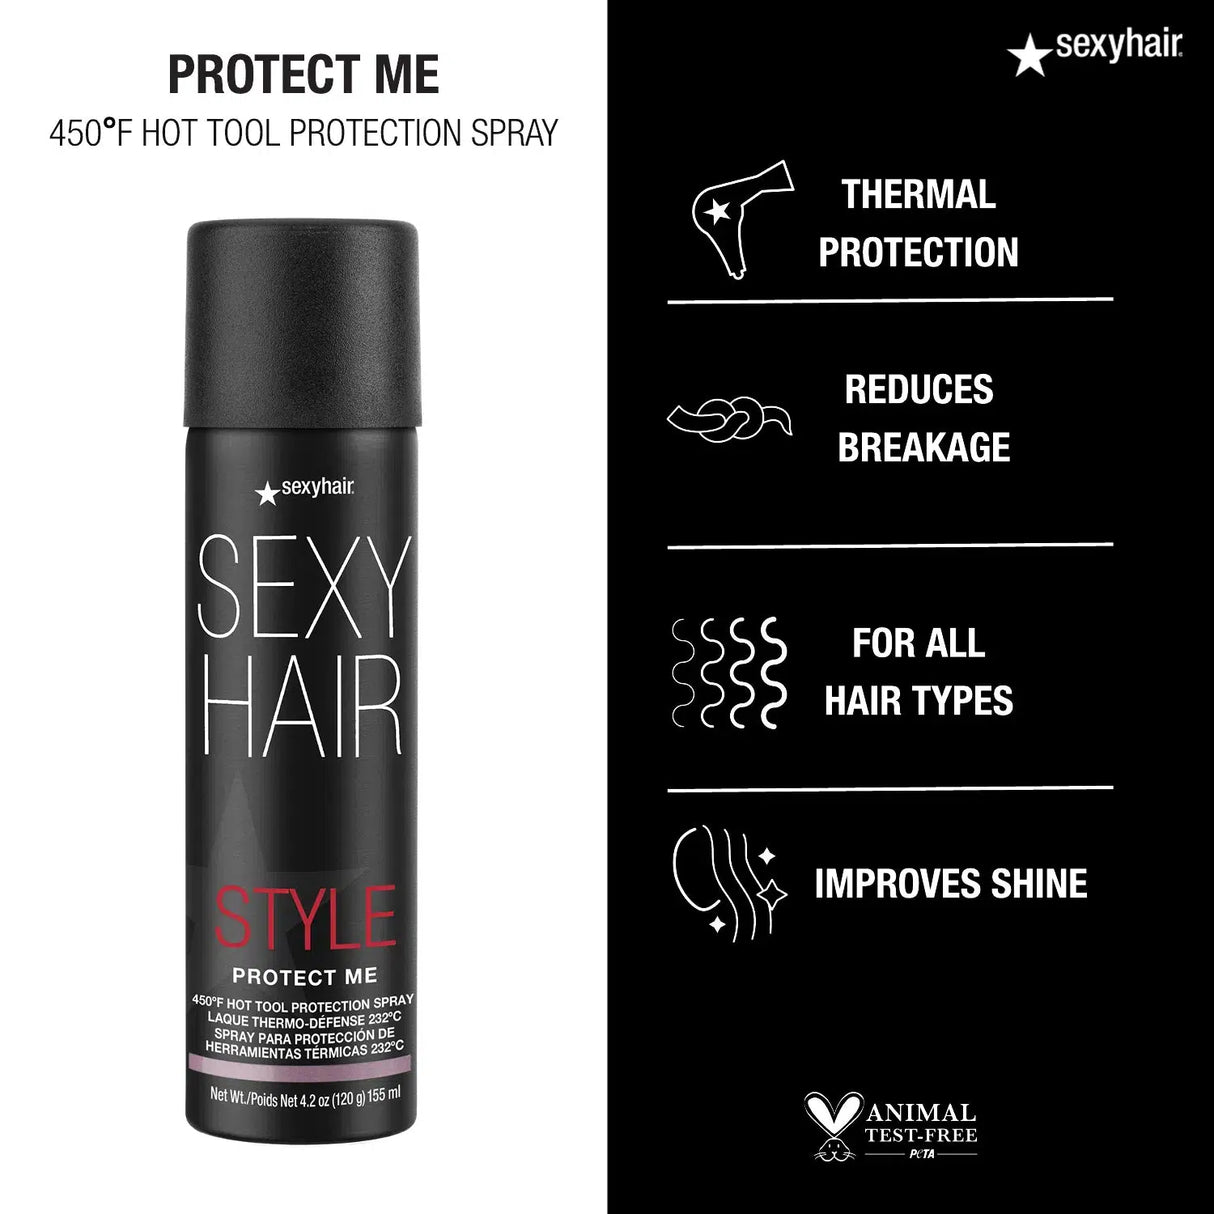 Protect Me 450°F Hot Tool Protection Spray